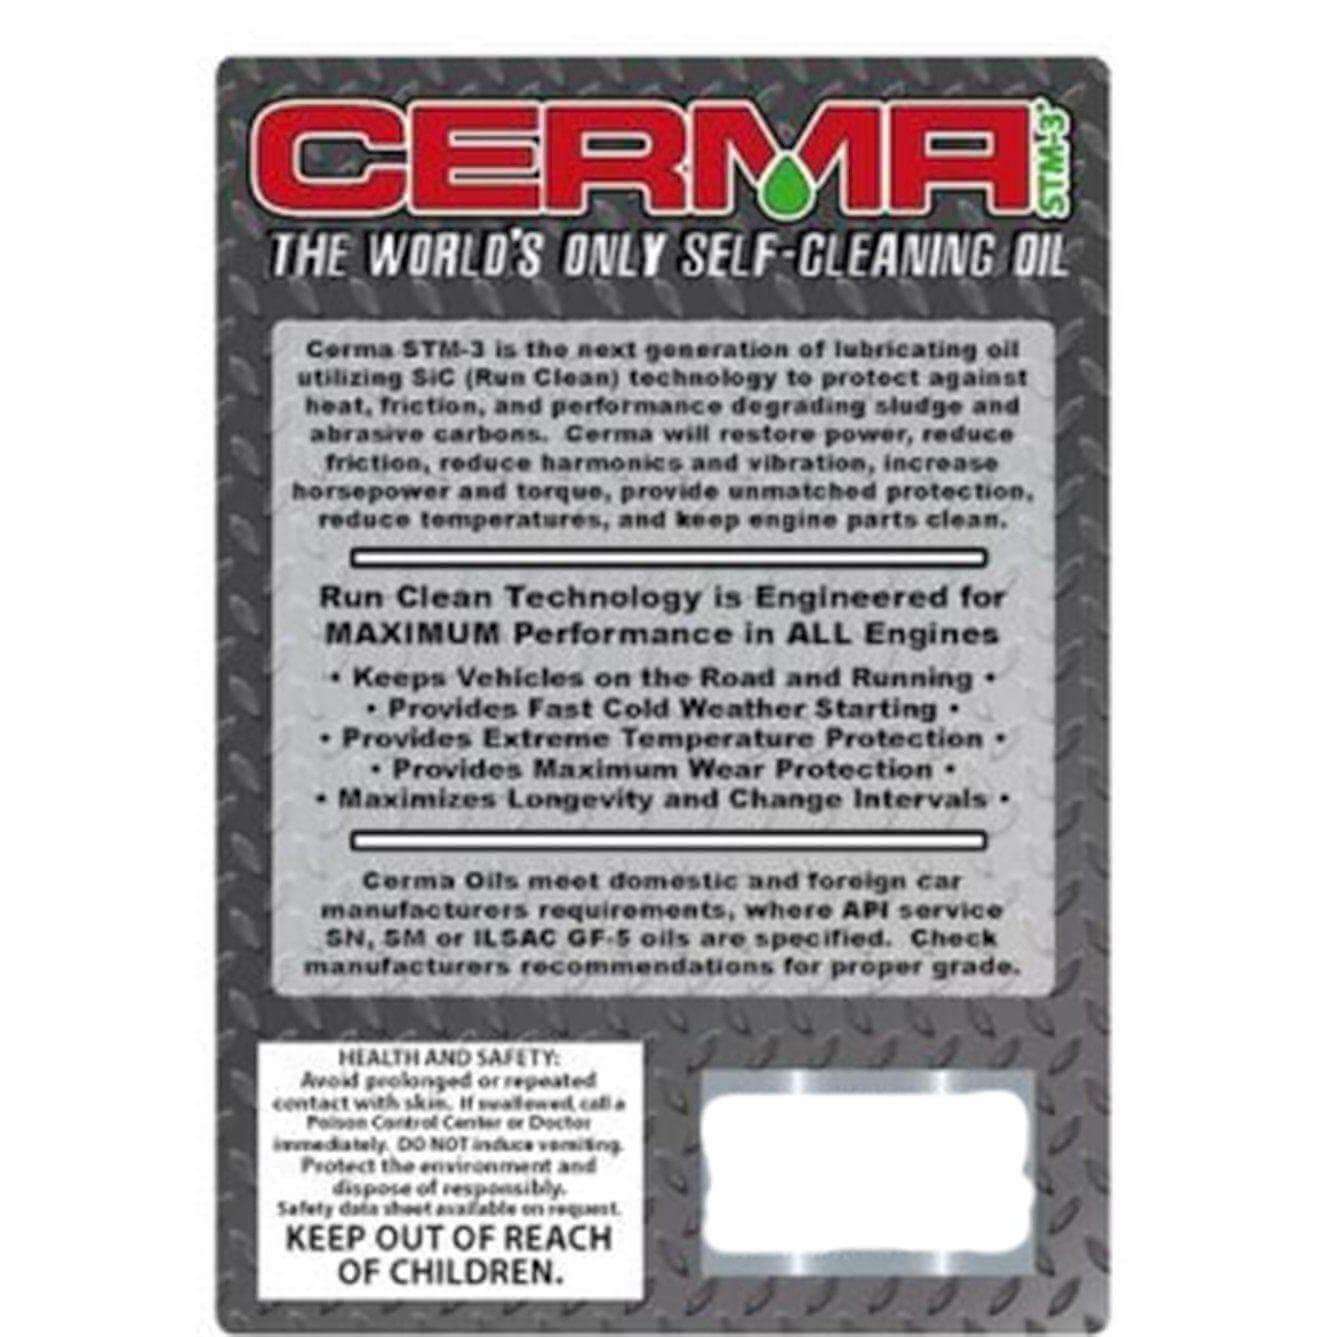 Cermax Ceramic 5w-20W Synthetic Motor Oil at $16.96 only from cermatreatment.com